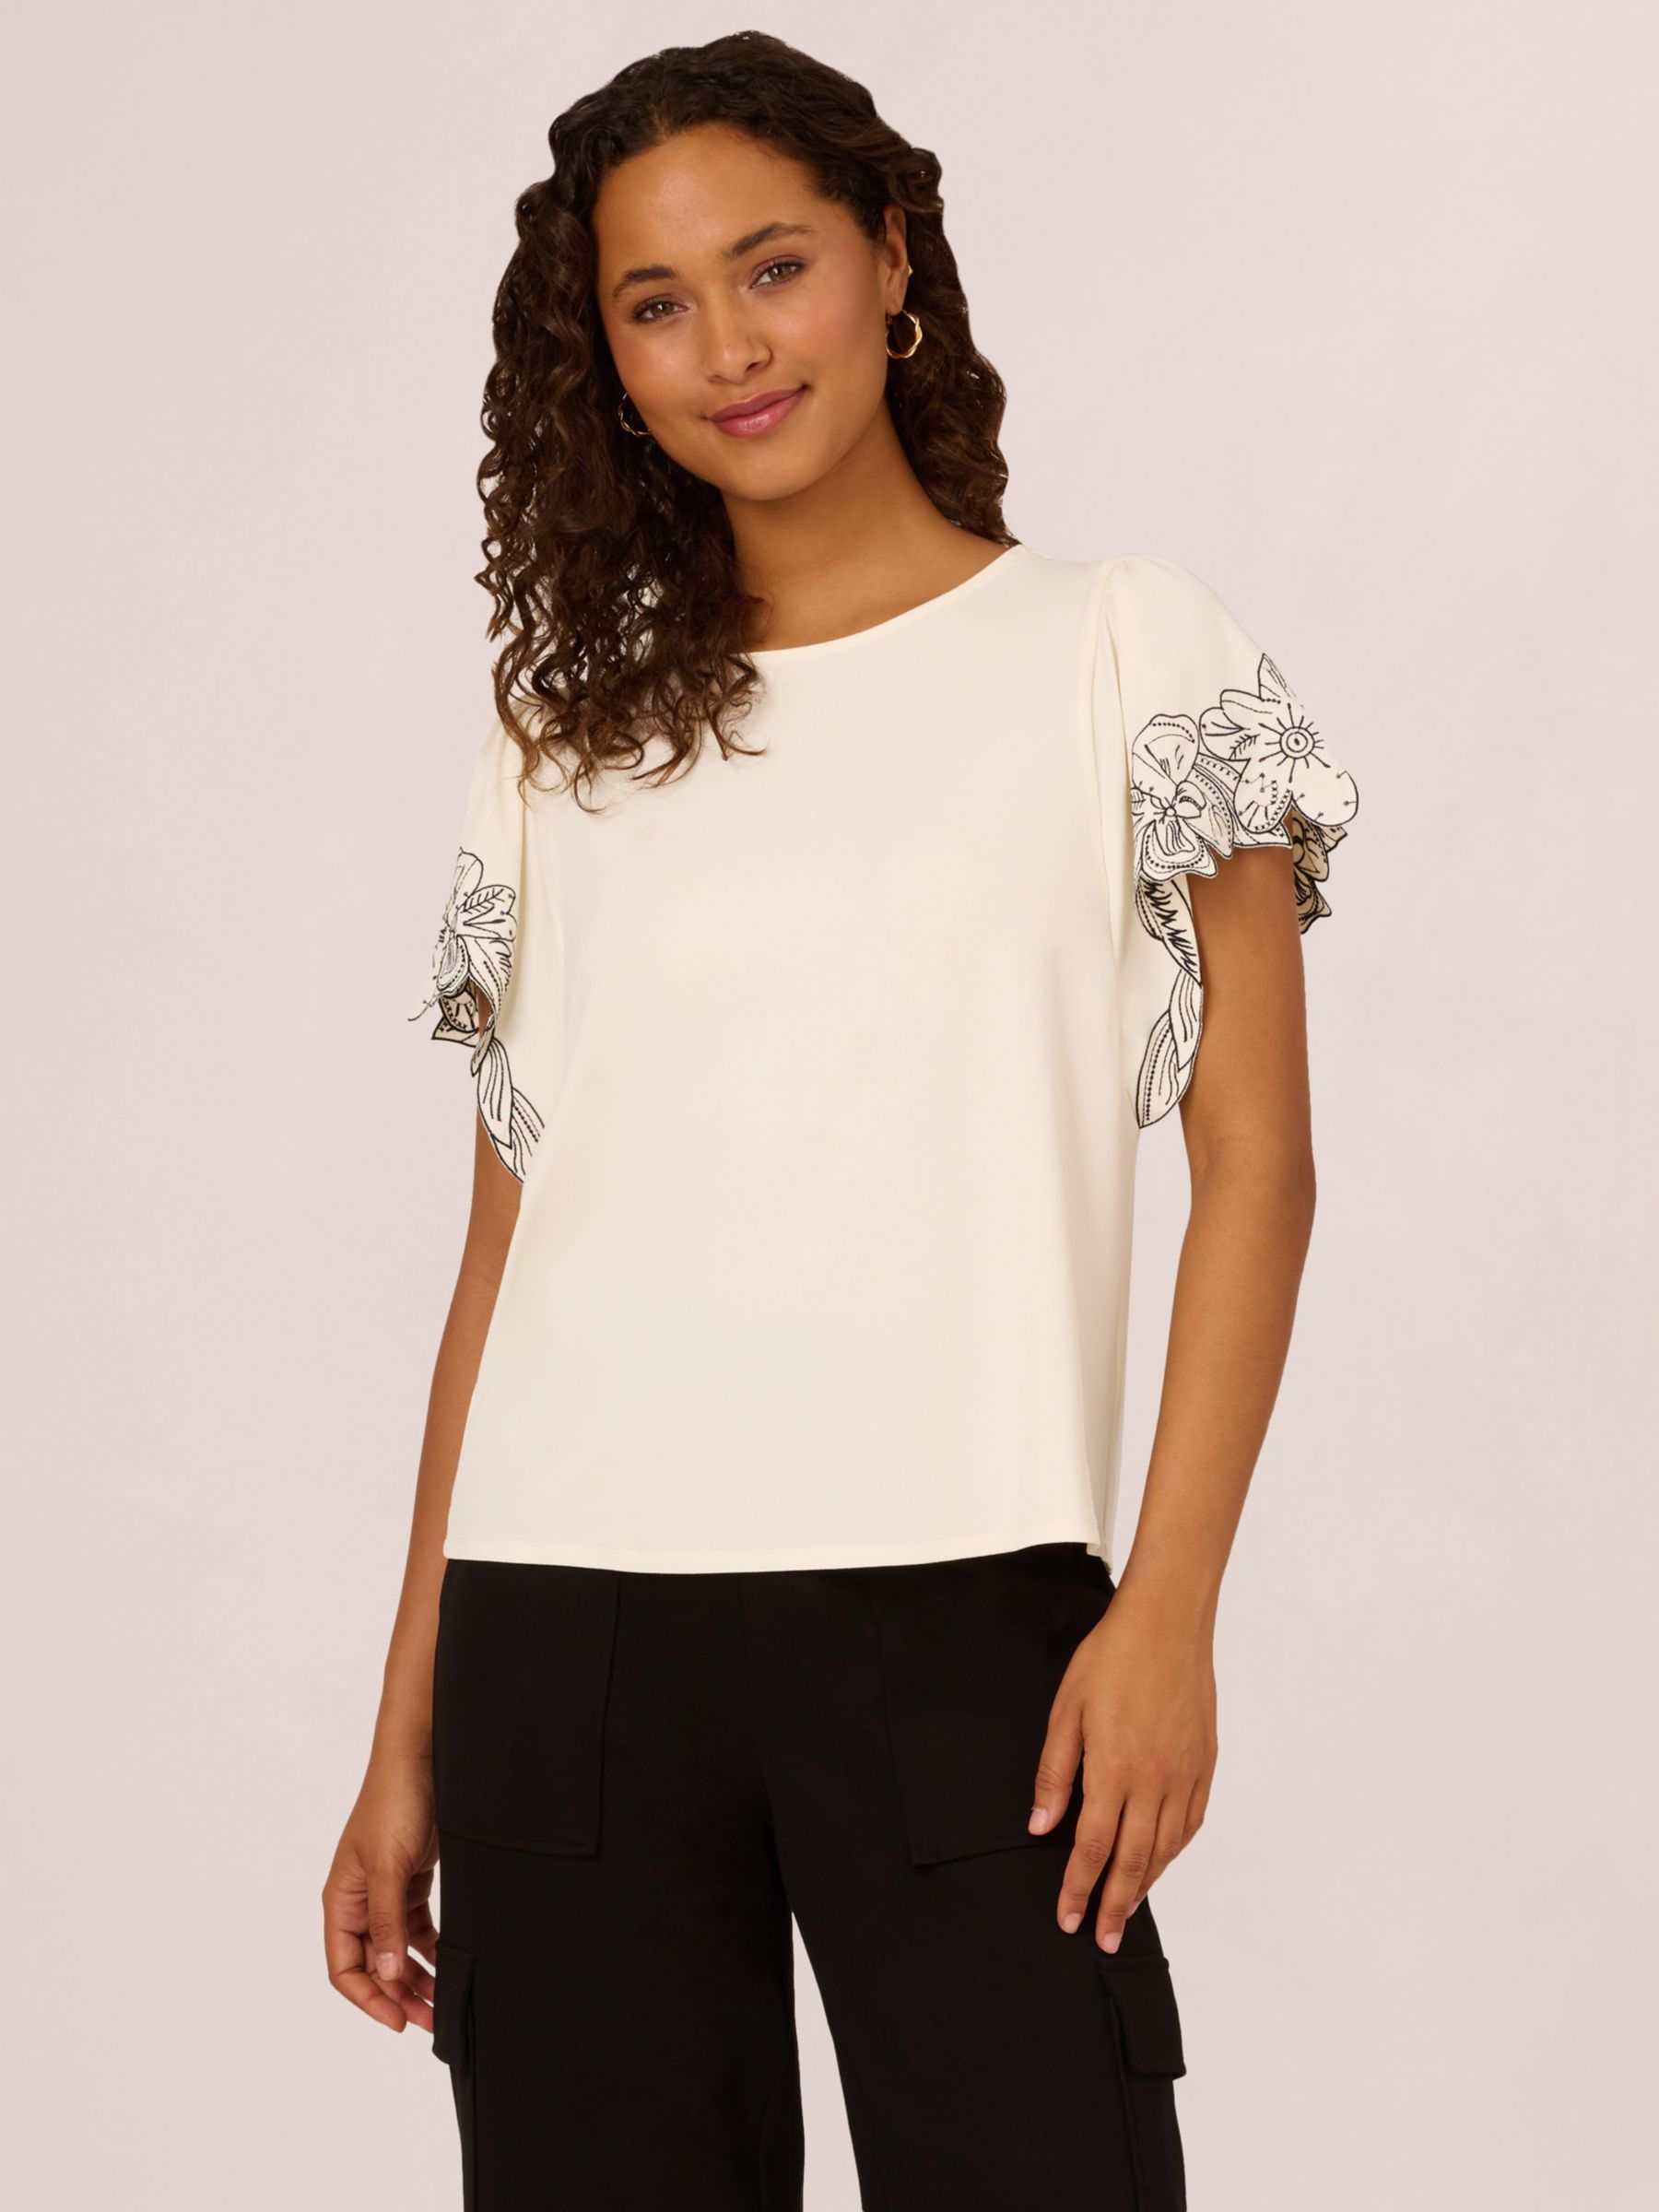 Adrianna Papell Floral Embroidered Sleeve Top, Cream/Black, XS